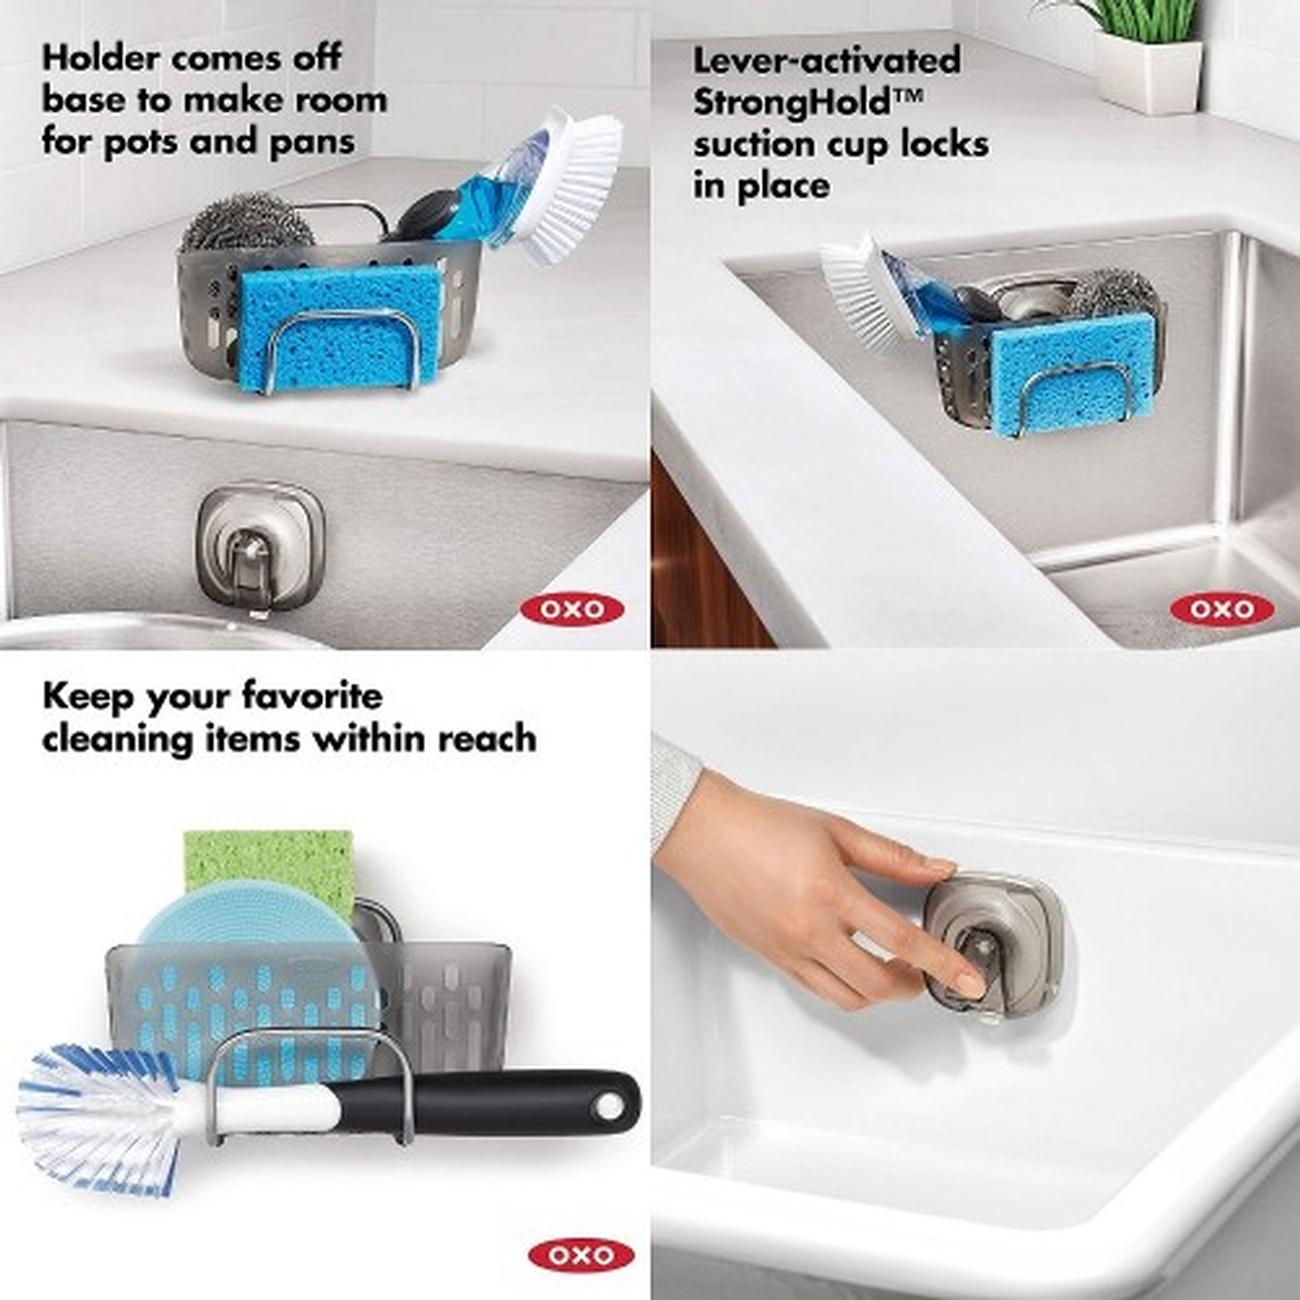 OXO Good Grips StrongHold™ Suction Sink Caddy